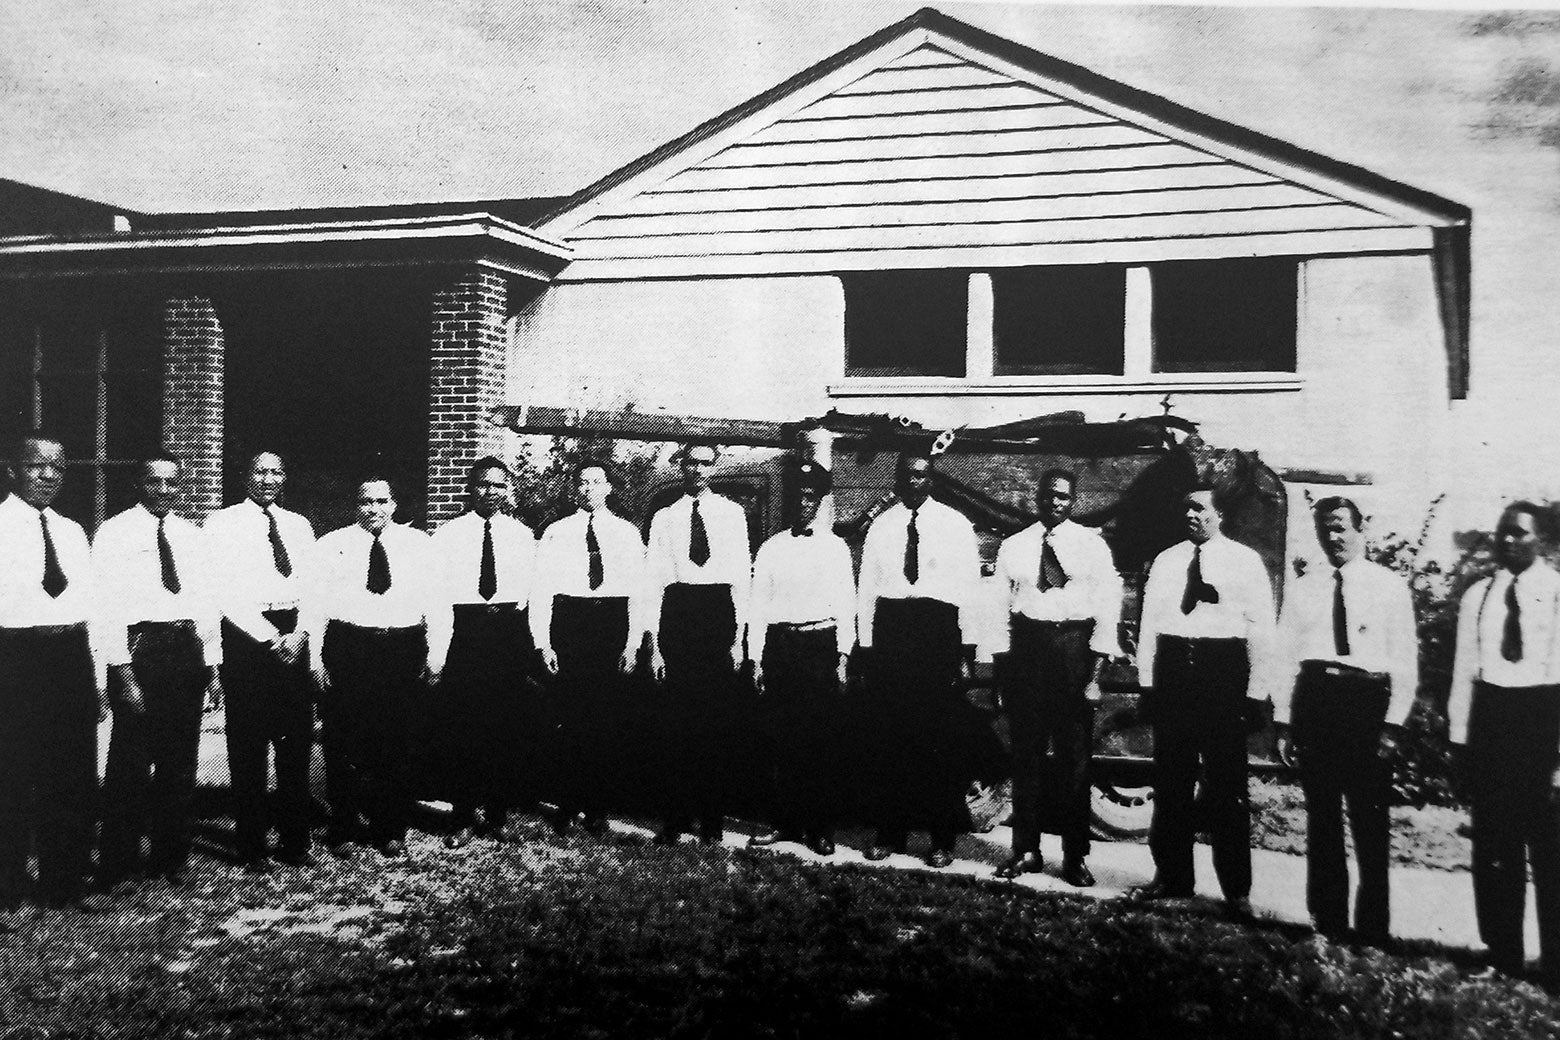 Thirteen men in white shirts and ties stand in a line in front of a low building.